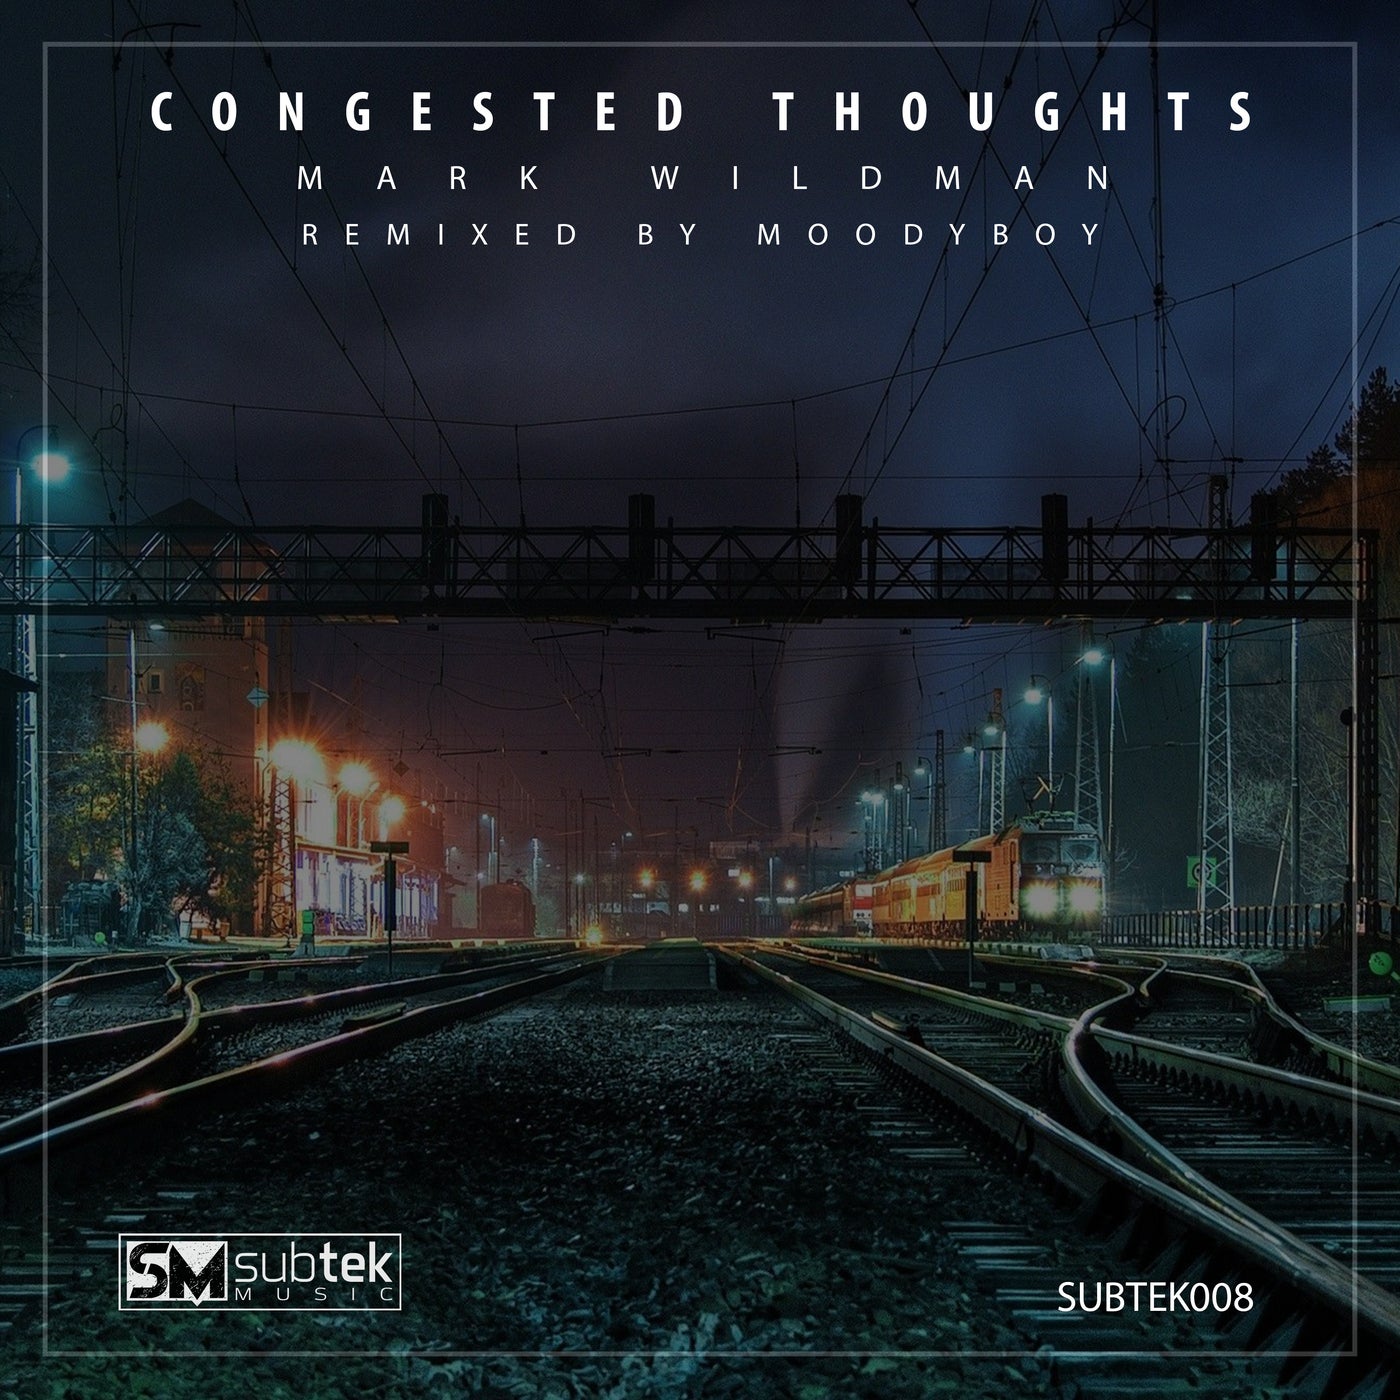 Congested Thoughts